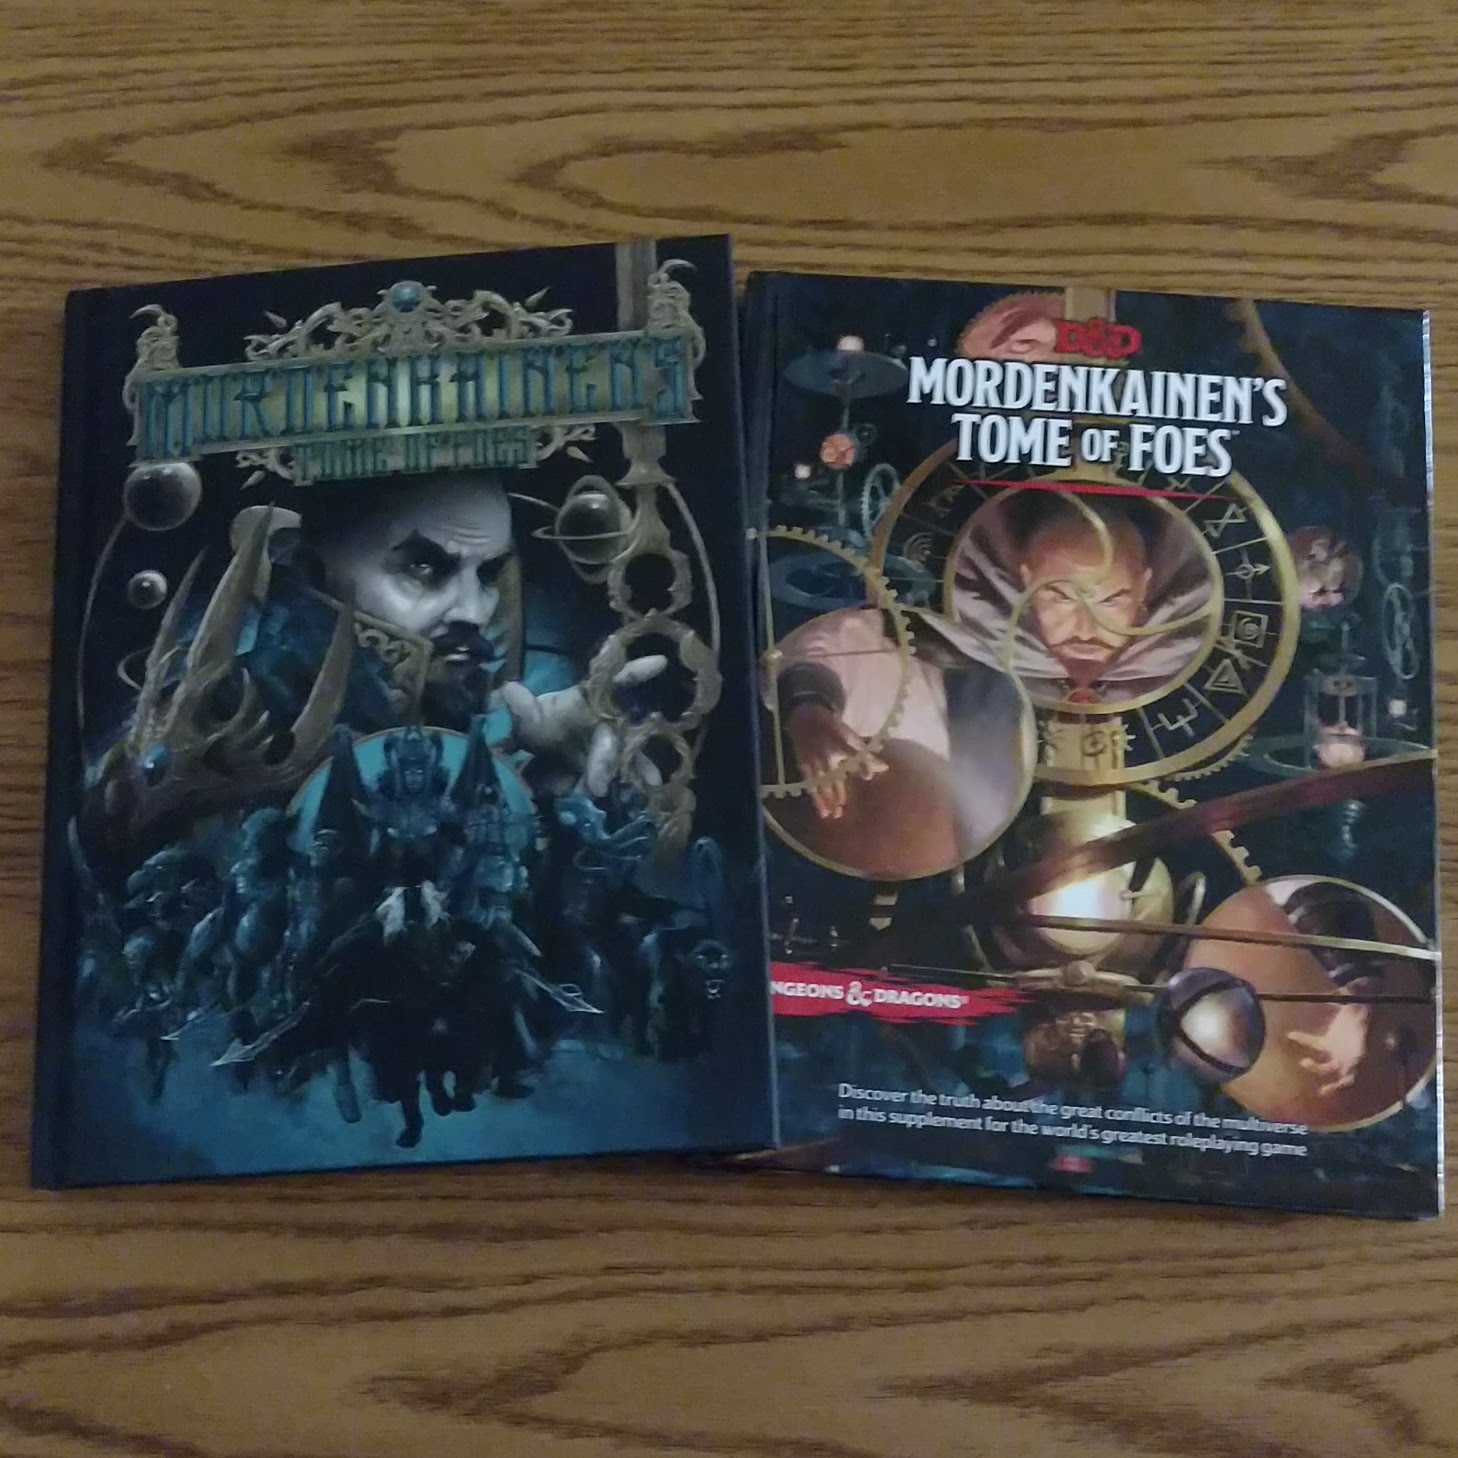 Other Side blog: Mordenkainen's Tome Foes